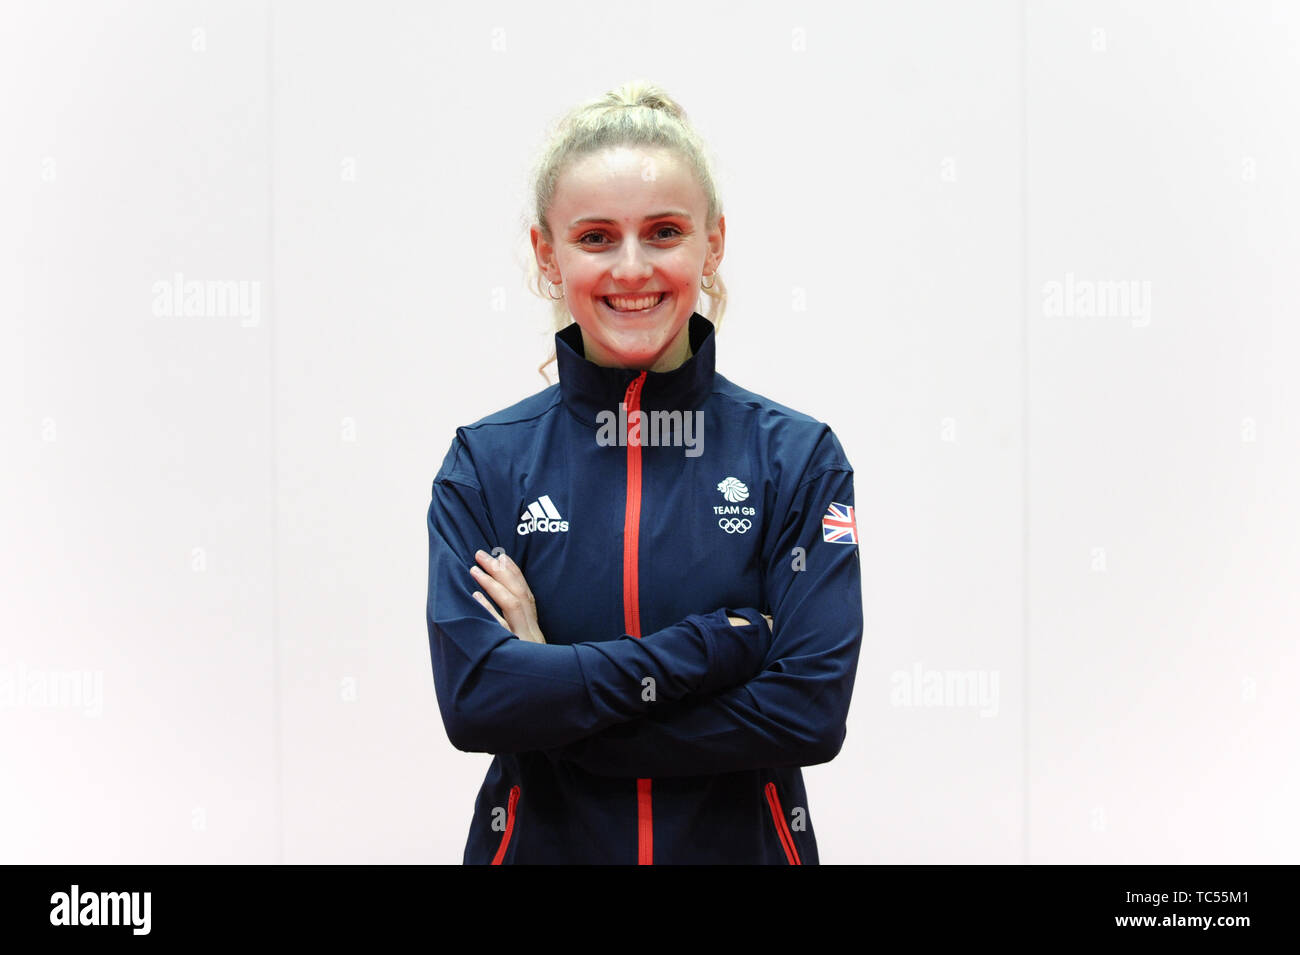 Megan Barker during the kitting out session for the 2019 Minsk European Games at the Birmingham NEC. Stock Photo